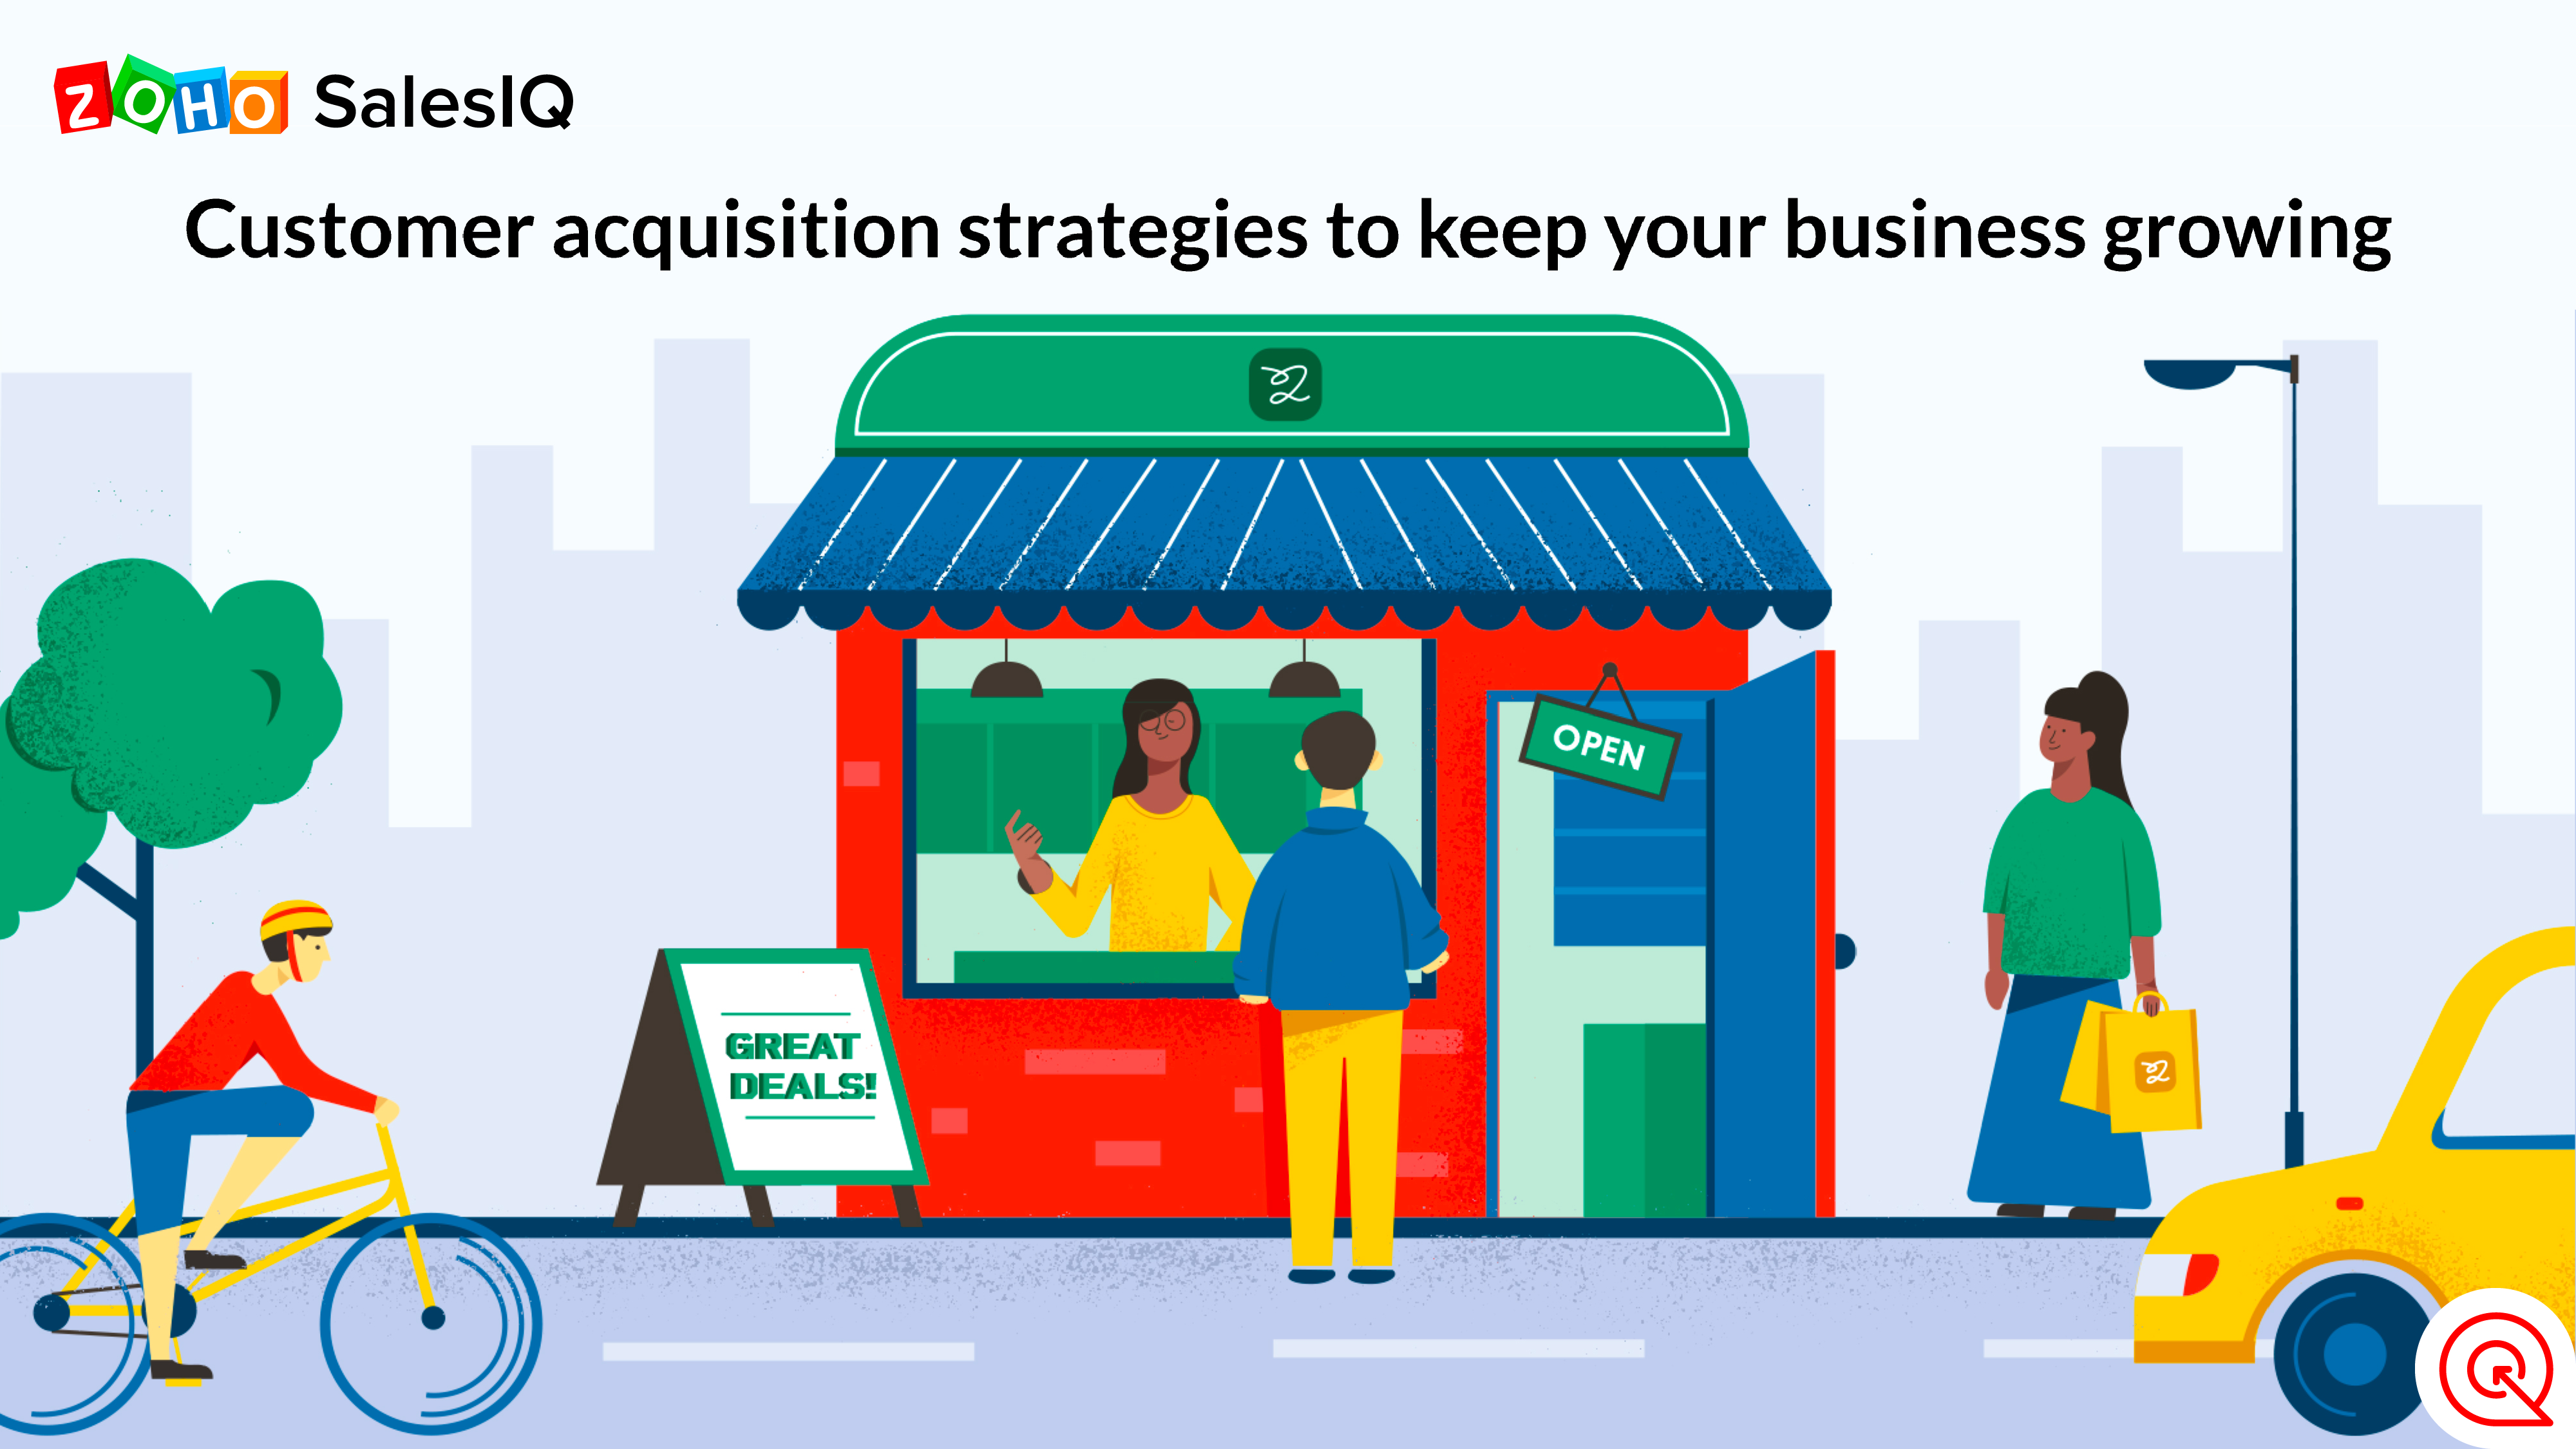 A complete guide to customer acquisition strategies and techniques